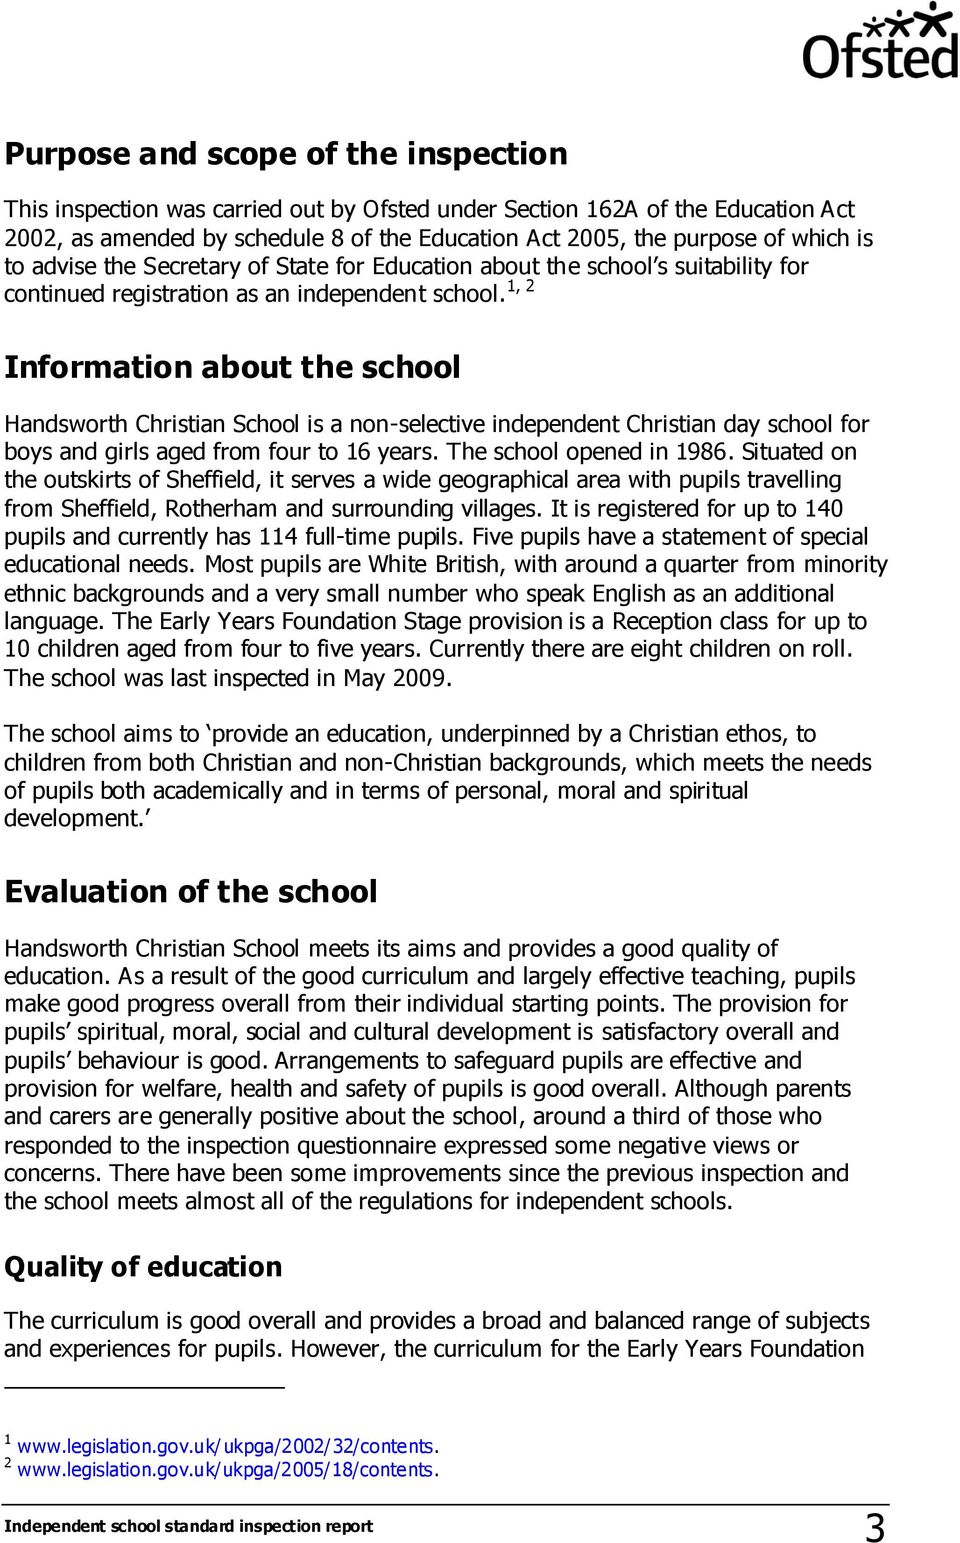 1, 2 Information about the school Handsworth Christian School is a non-selective independent Christian day school for boys and girls aged from four to 16 years. The school opened in 1986.